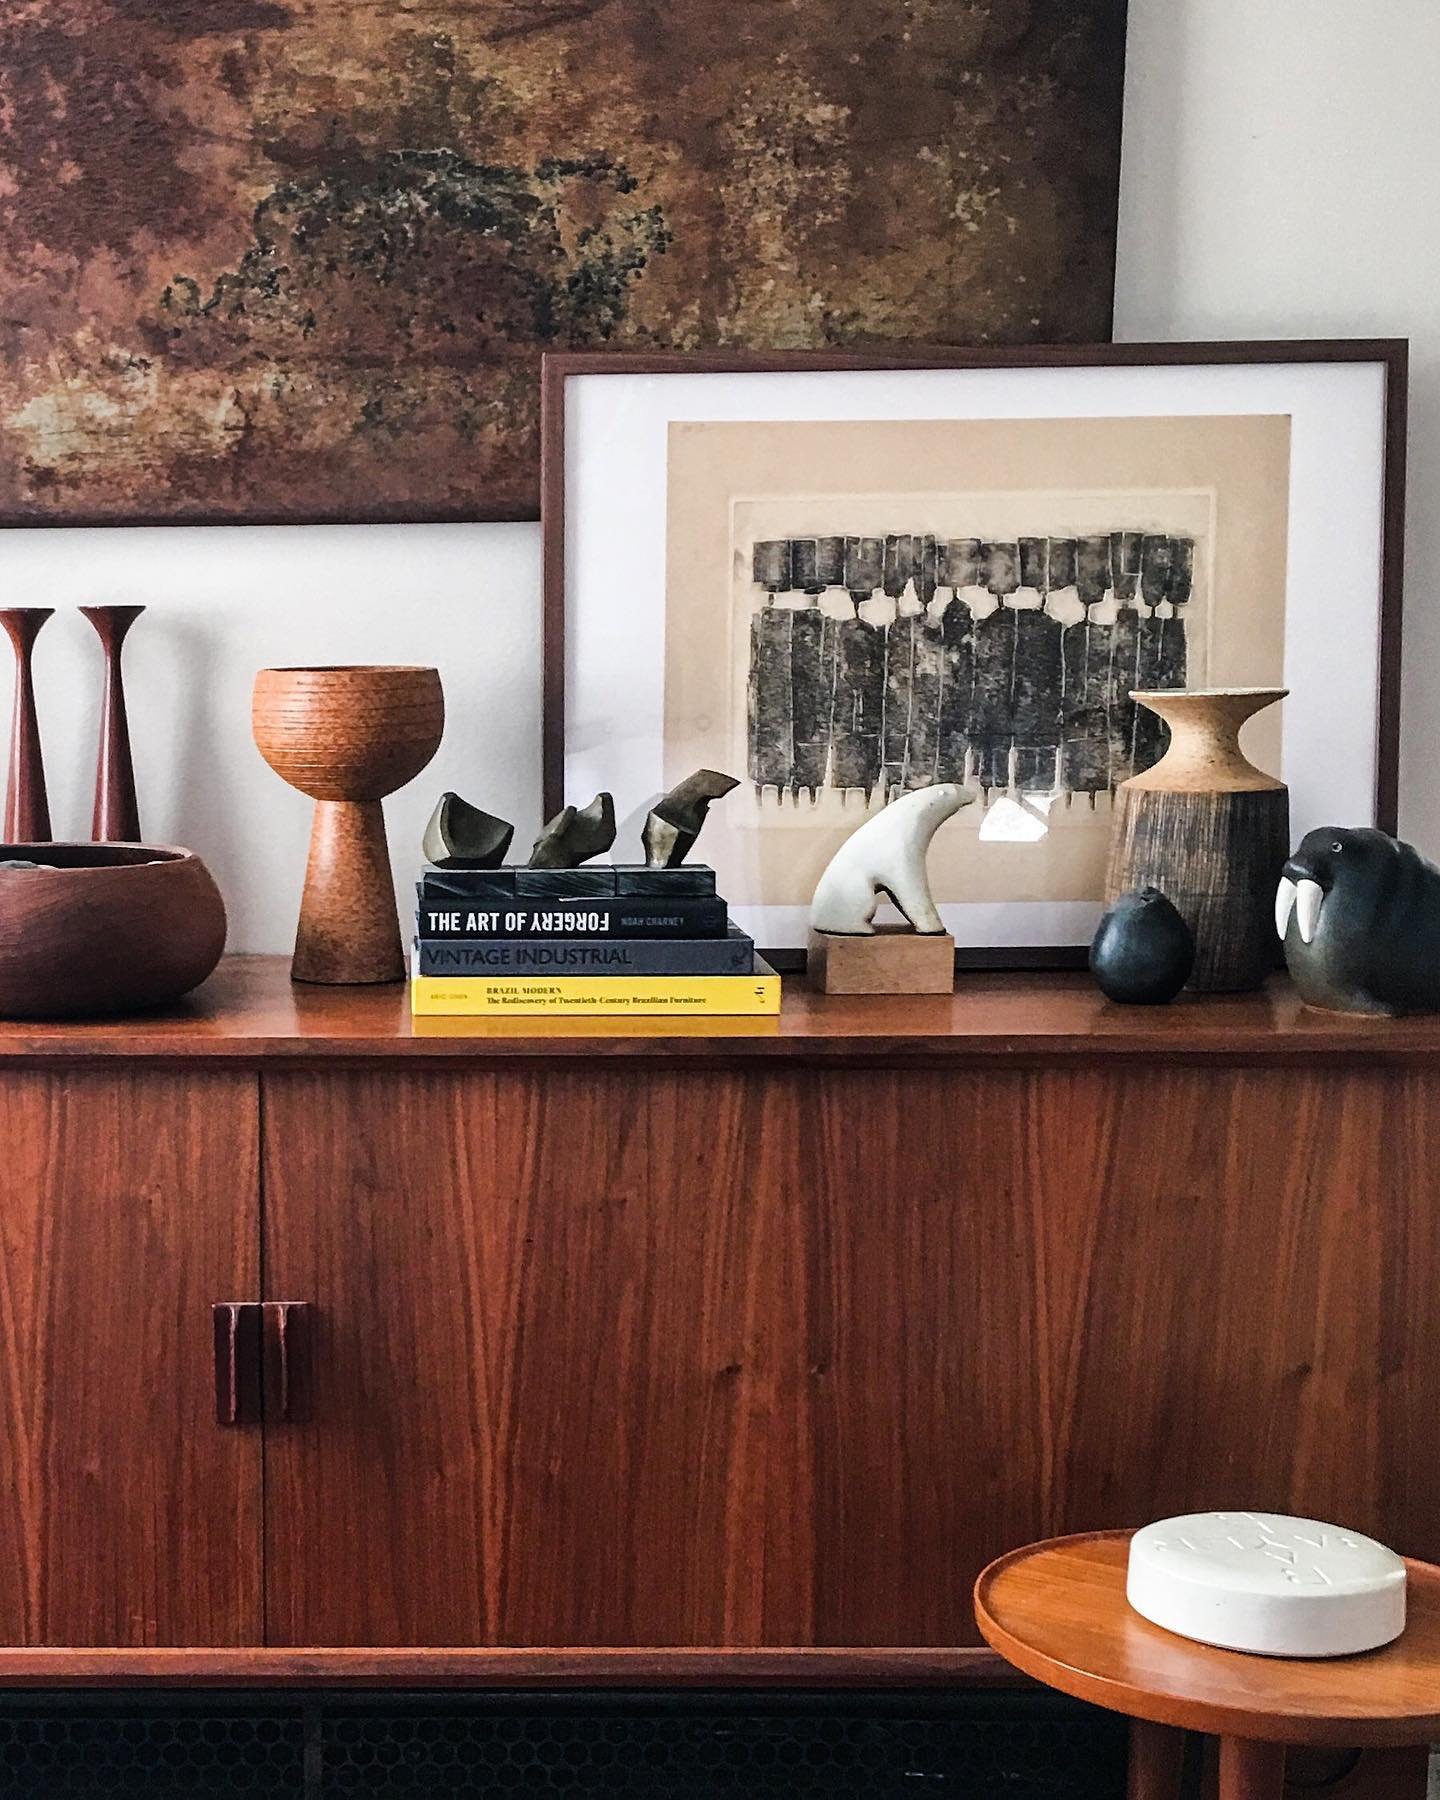 Little museum on credenza.  Important Reminder: May 4th is the Hollin Hills home and garden tour in Alexandria and this year we are sponsors! 
This is the 75th anniversary of this historic mid century modern neighborhood.Tickets are completely sold o